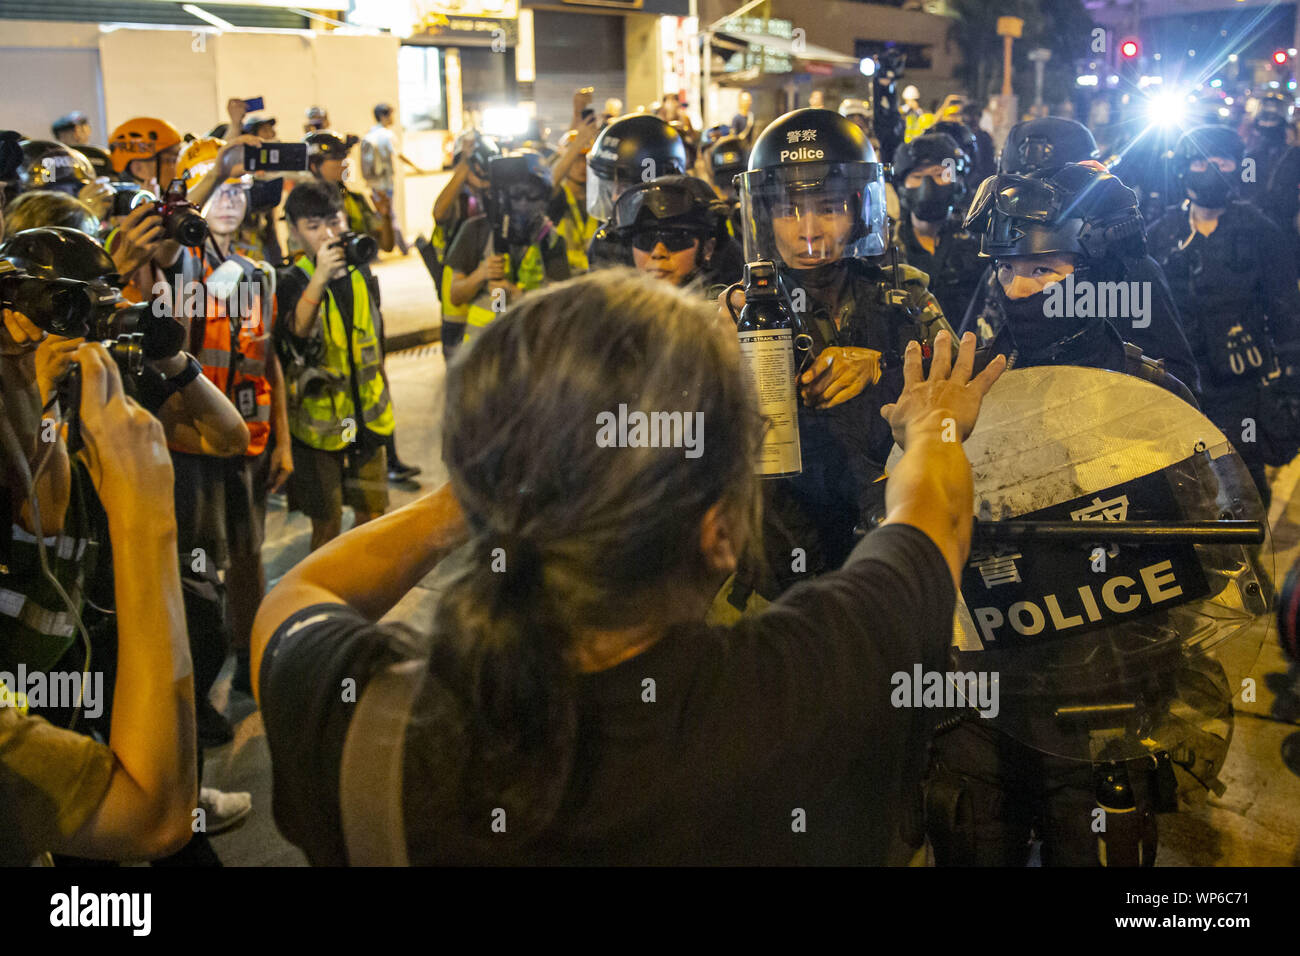 Hong Kong, China. 7th Sep, 2019. A pro democracy protester implores police to show restraint as he walks towards them and an officer points a can of pepper spray in his face. Hundred of protesters and members of the publicgathered for yet another night in front of the Mongkok police station in order to continue demanding the release of the cctv footage from the Prince Edward MTR station, the site of an alleged brutal police crackdown on suspected protesters and members of the public. Credit: Adryel Talamantes/ZUMA Wire/Alamy Live News Stock Photo